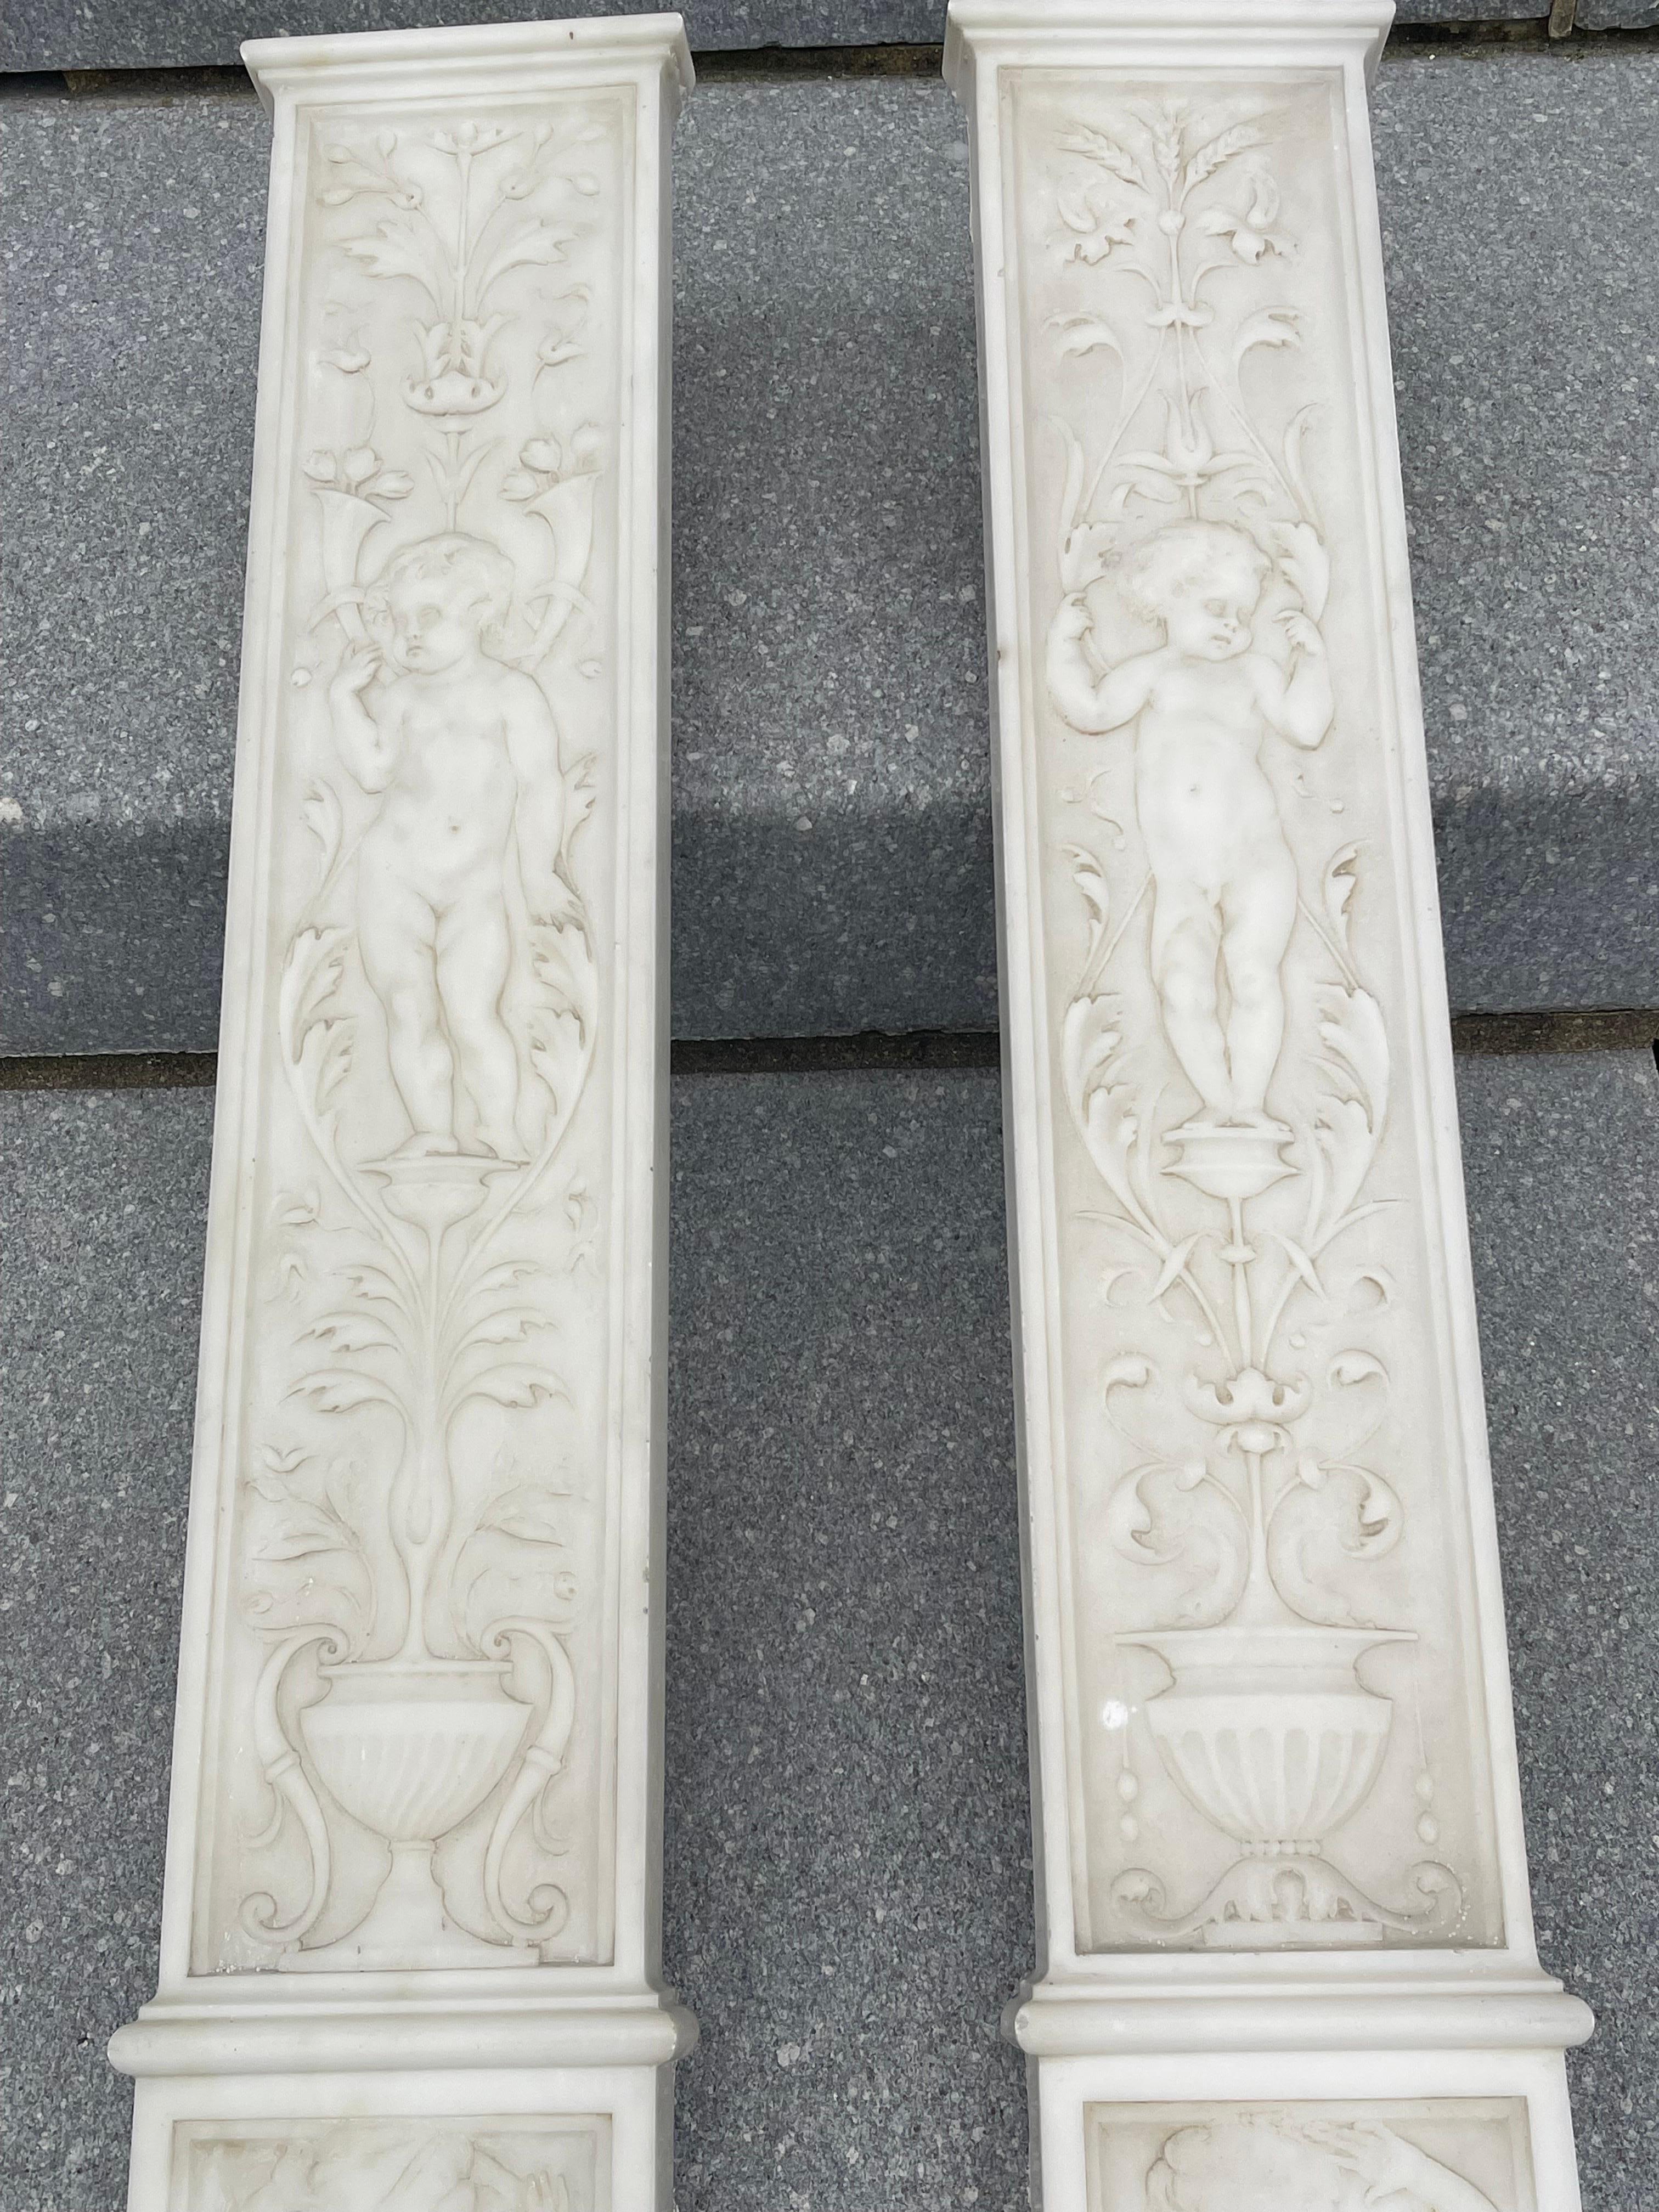 An incredible find. These are a Pair of English Neo-Classical statuary marble reliefs, ca 1820. Depicted are a male and female winged Cupid on the bottom and two pudgy babies rising out of urns  (also male and female) and surrounded by garlands,